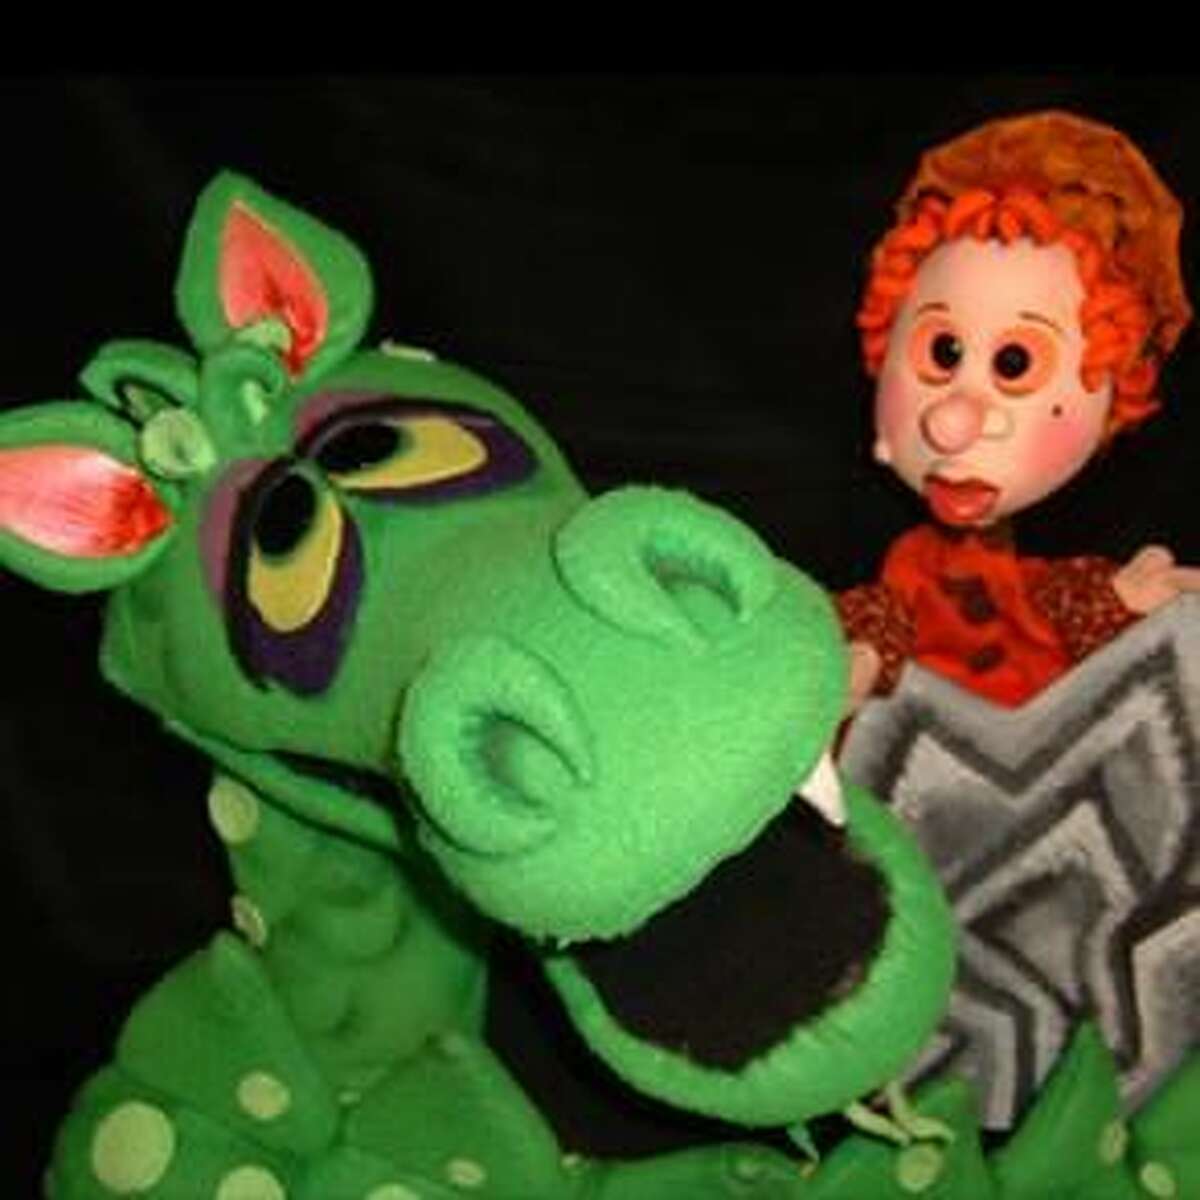 The Pumpernickel Puppets will perform at the Gunn Memorial Junior Library in Washington on Thursday at 5 p.m.